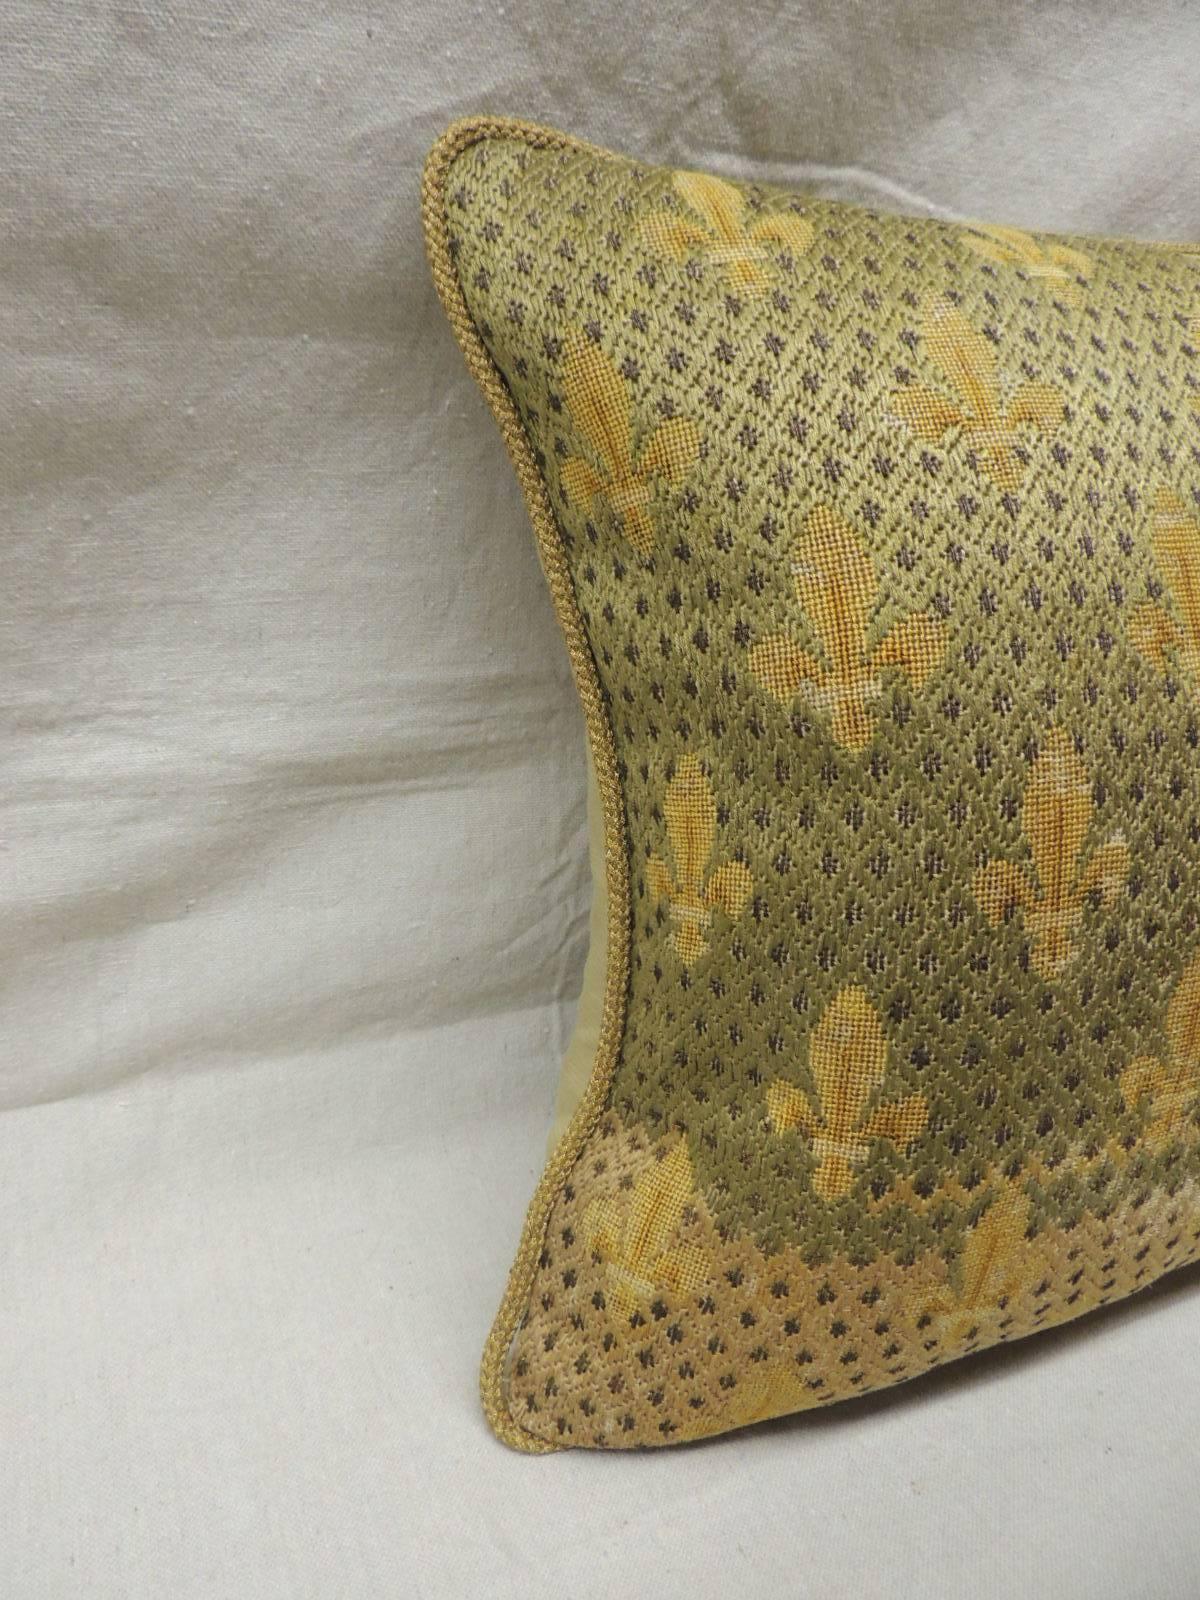 Antique textile fleur-de-lis embroidery tapestry pillow with wool and silk. Encrusted metallic threads in moss and green panel. Golden silk backing and gold metallic rope trim all around. Antique decorative pillow handmade and designed in the USA.